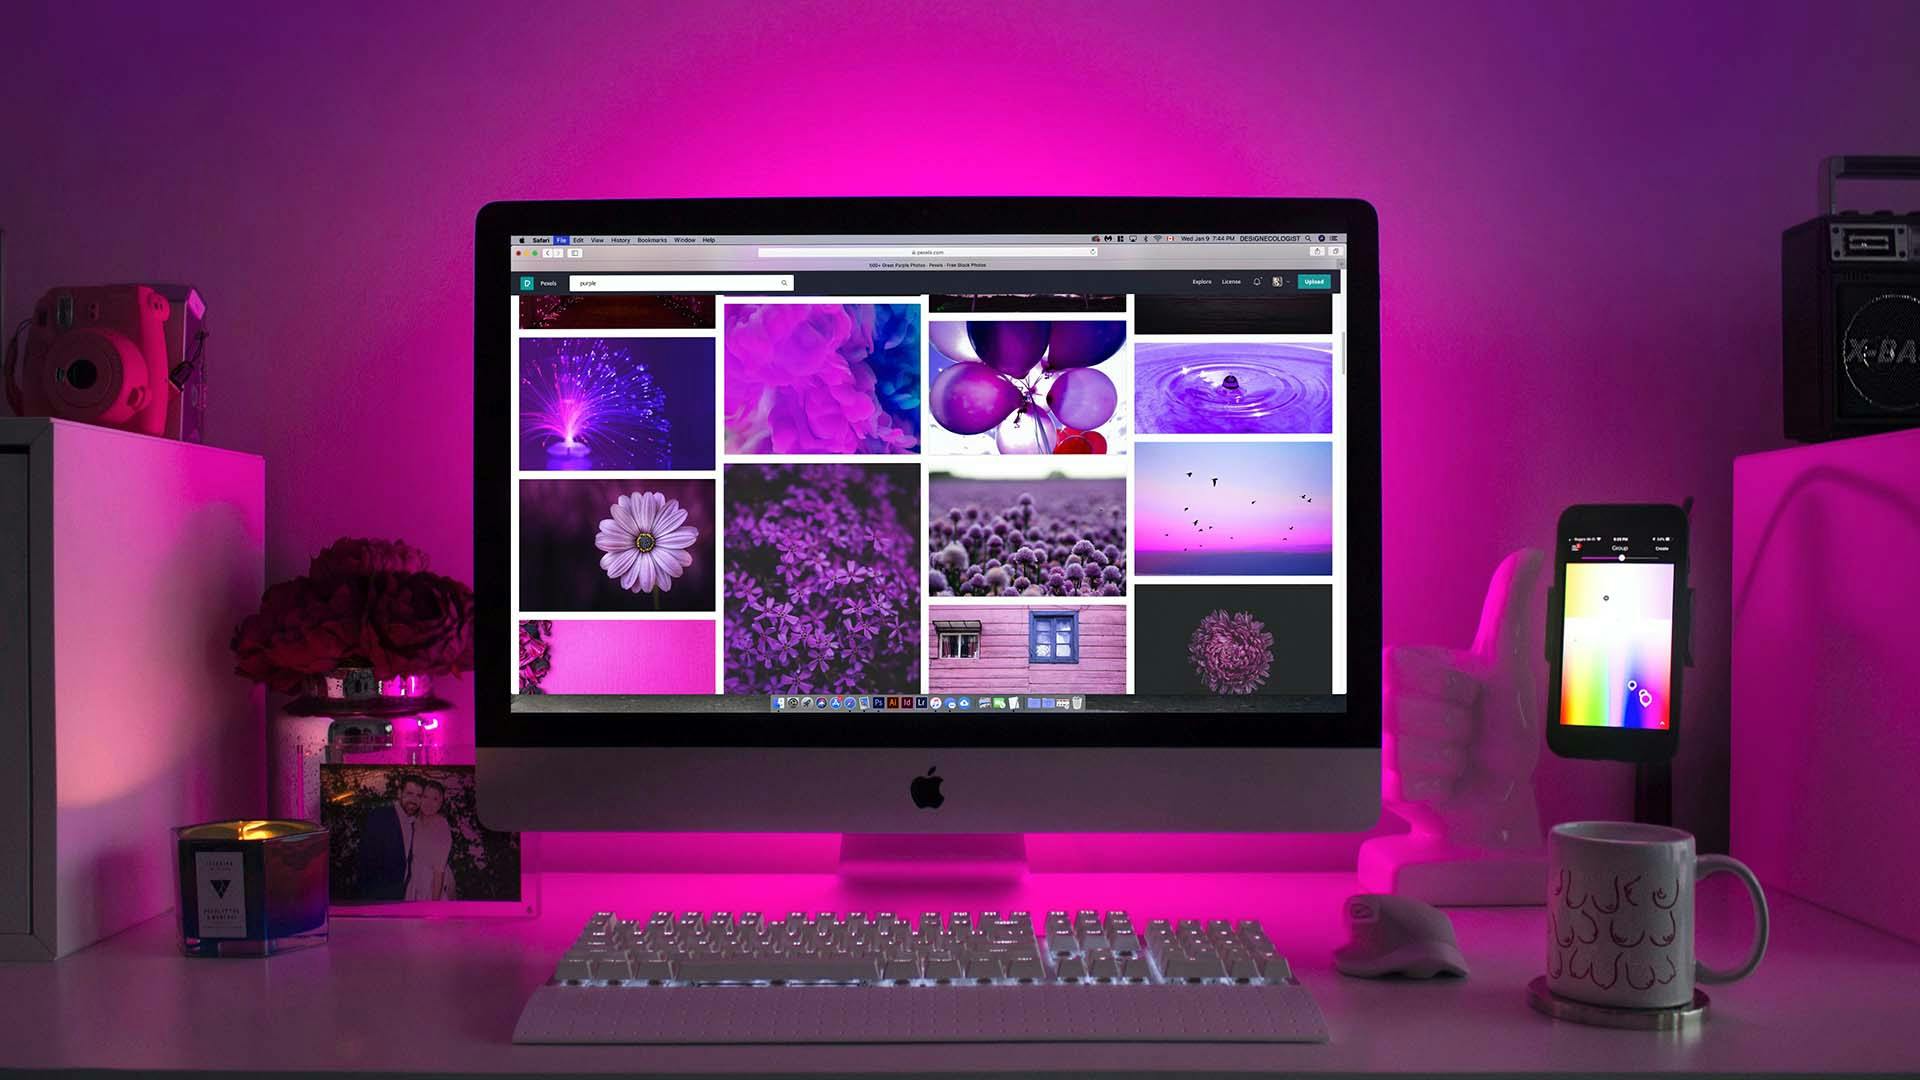 Silver iMac Displaying purple photos, and an iPhone displaying an RGB Color picker